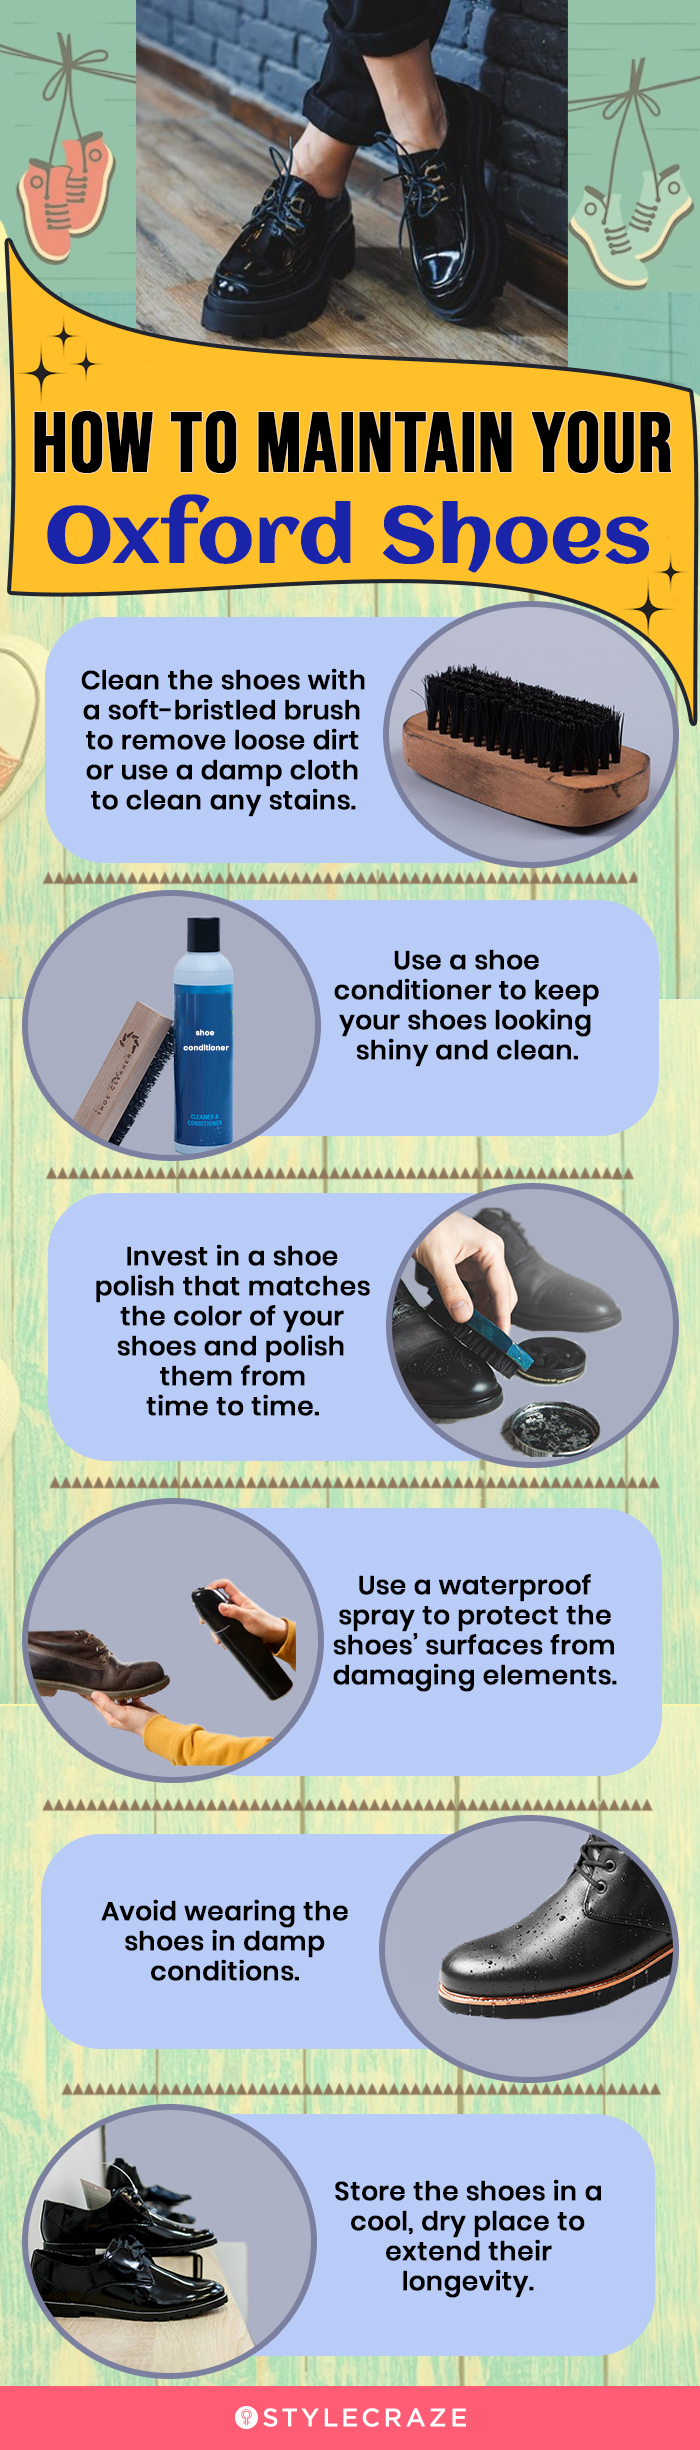 How To Maintain Your Oxford Shoes (infographic)